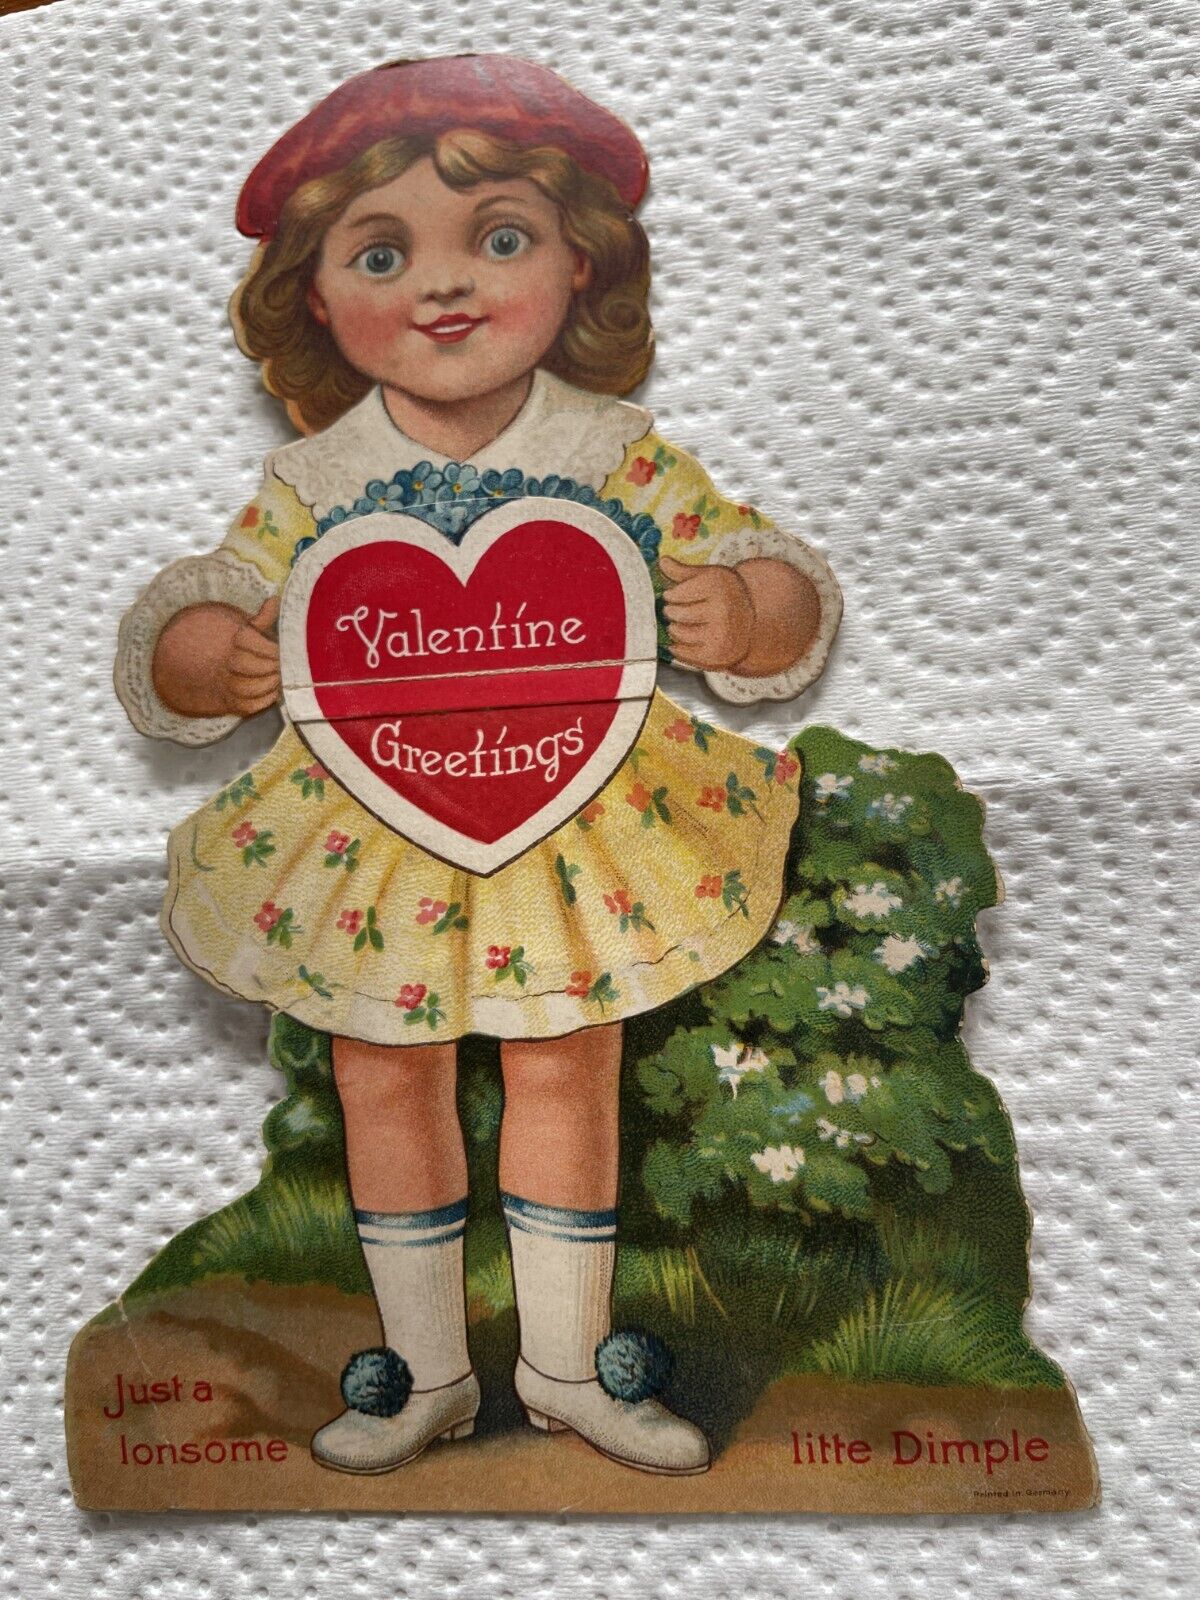 Antique Valentines Day Greeting Card Just a Lonsome Little Dimple Wide Open Eyes